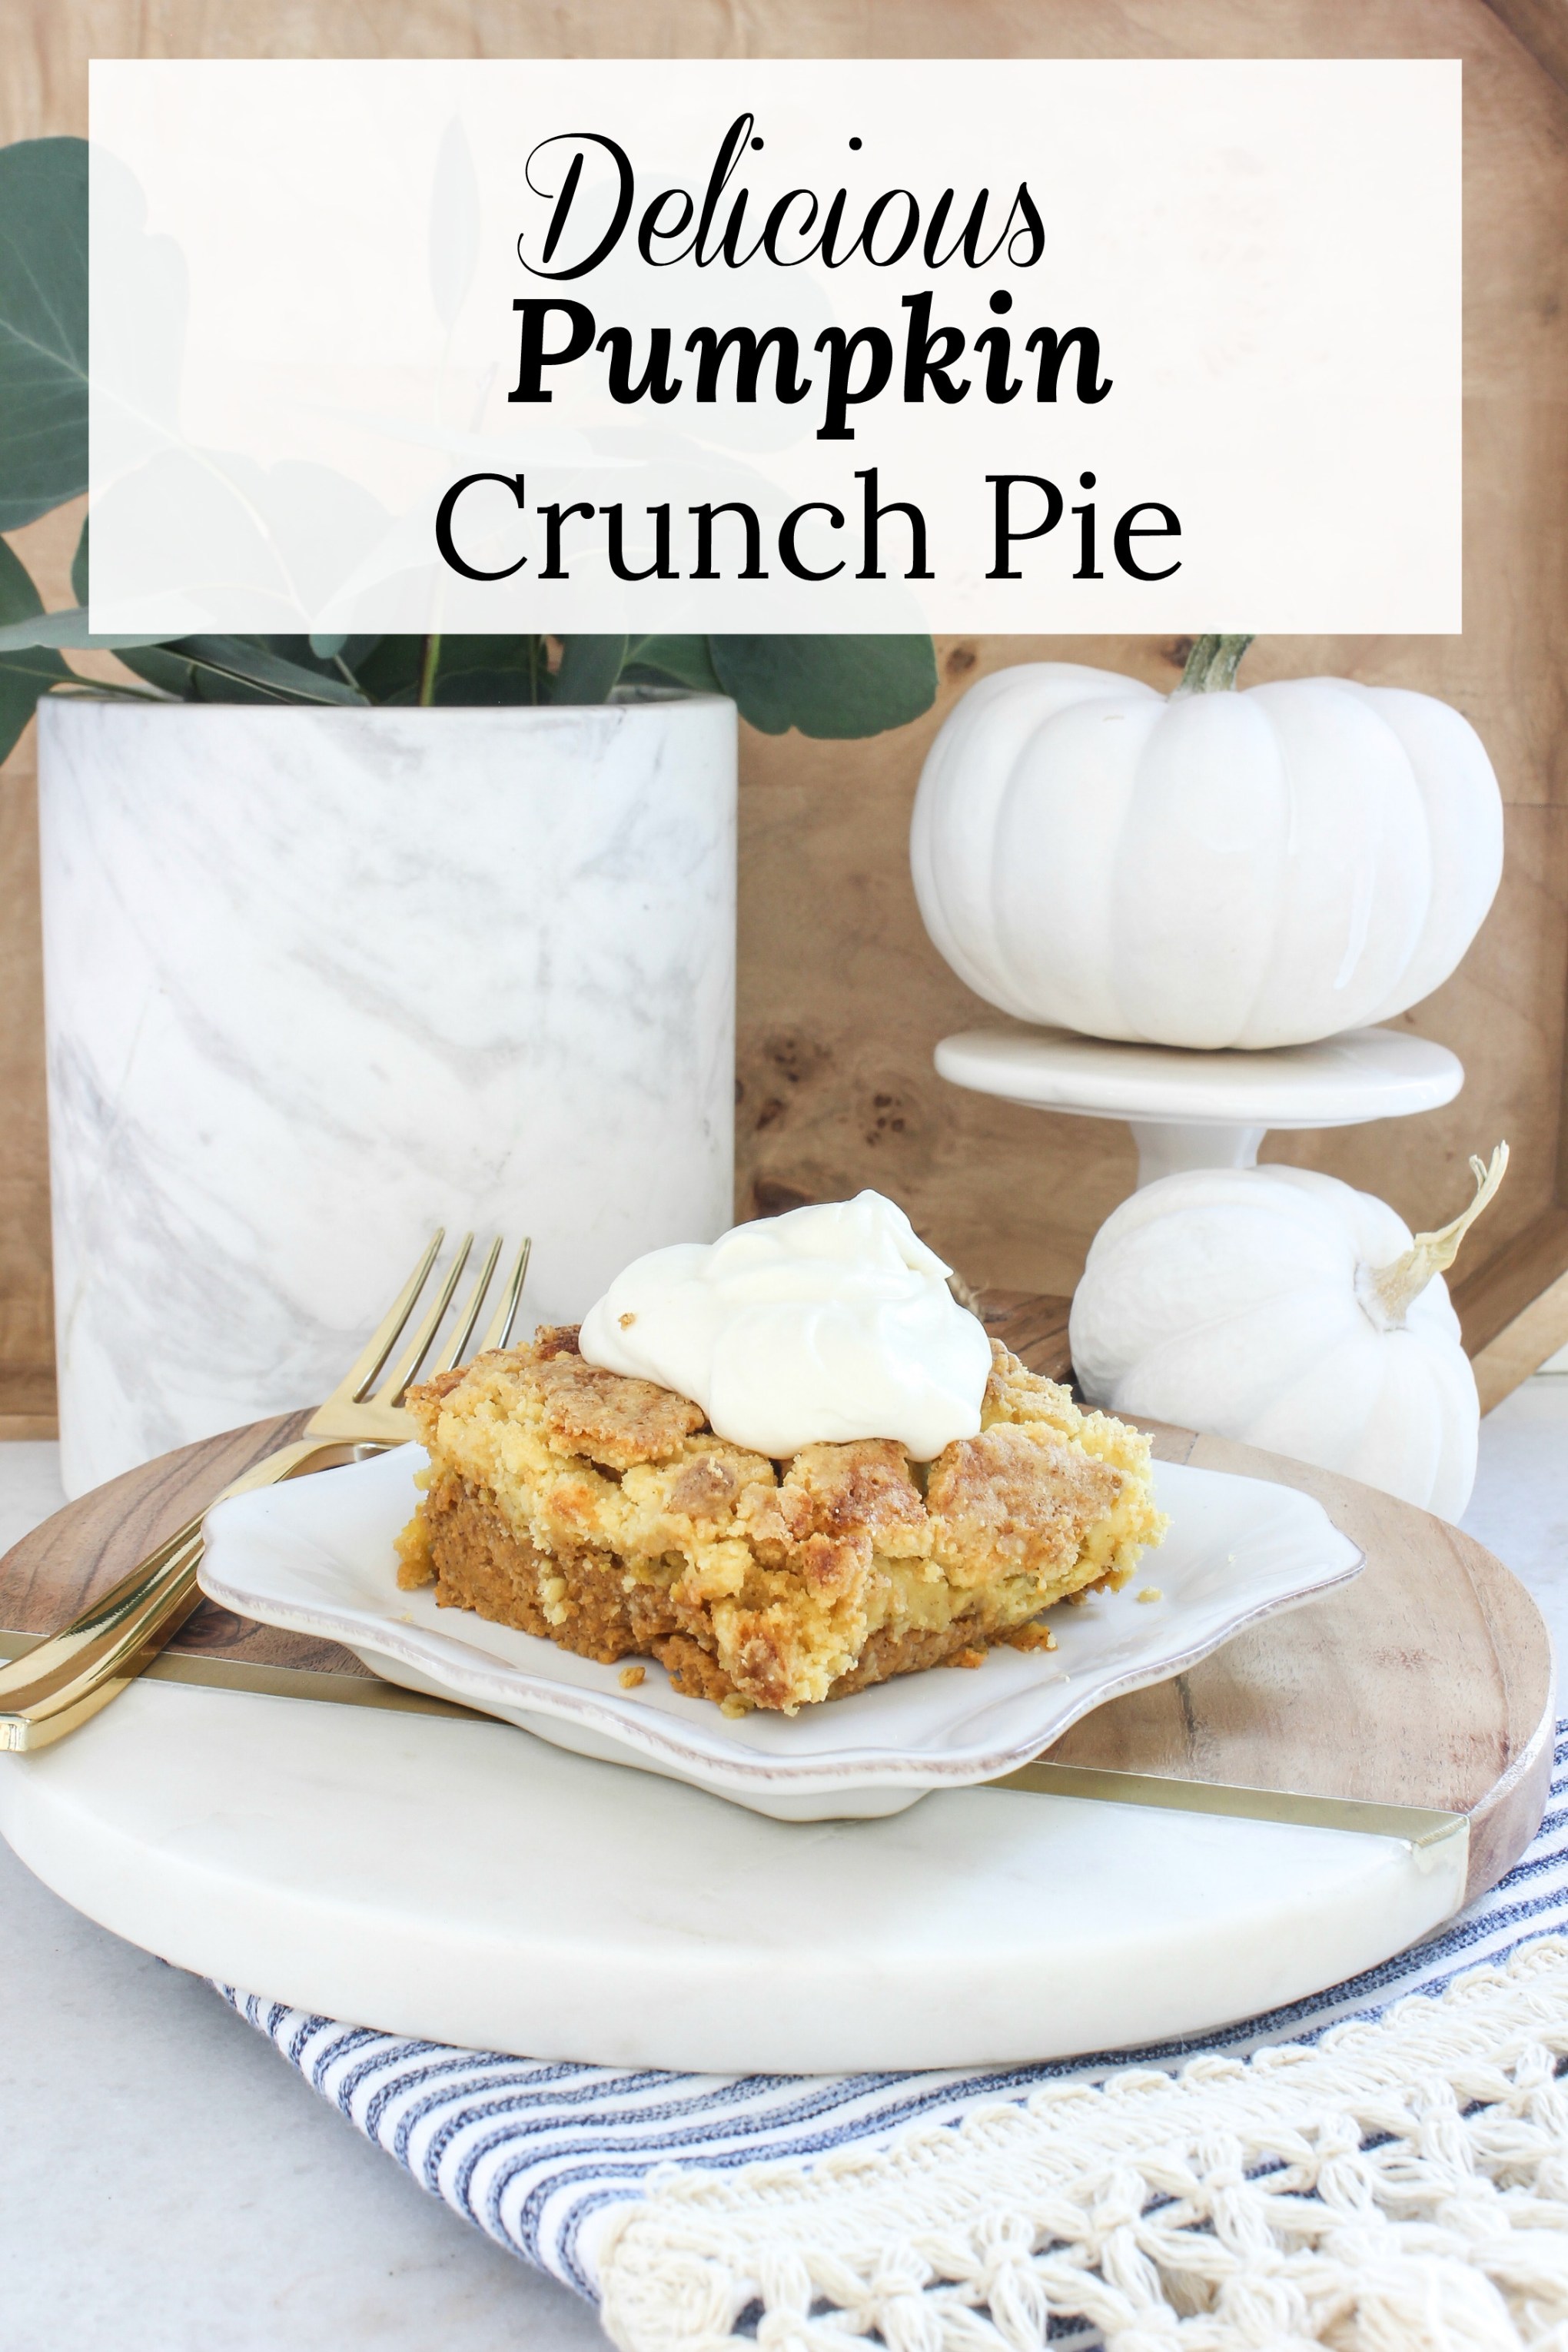 umpkin Crunch Pie | Meaningful Spaces